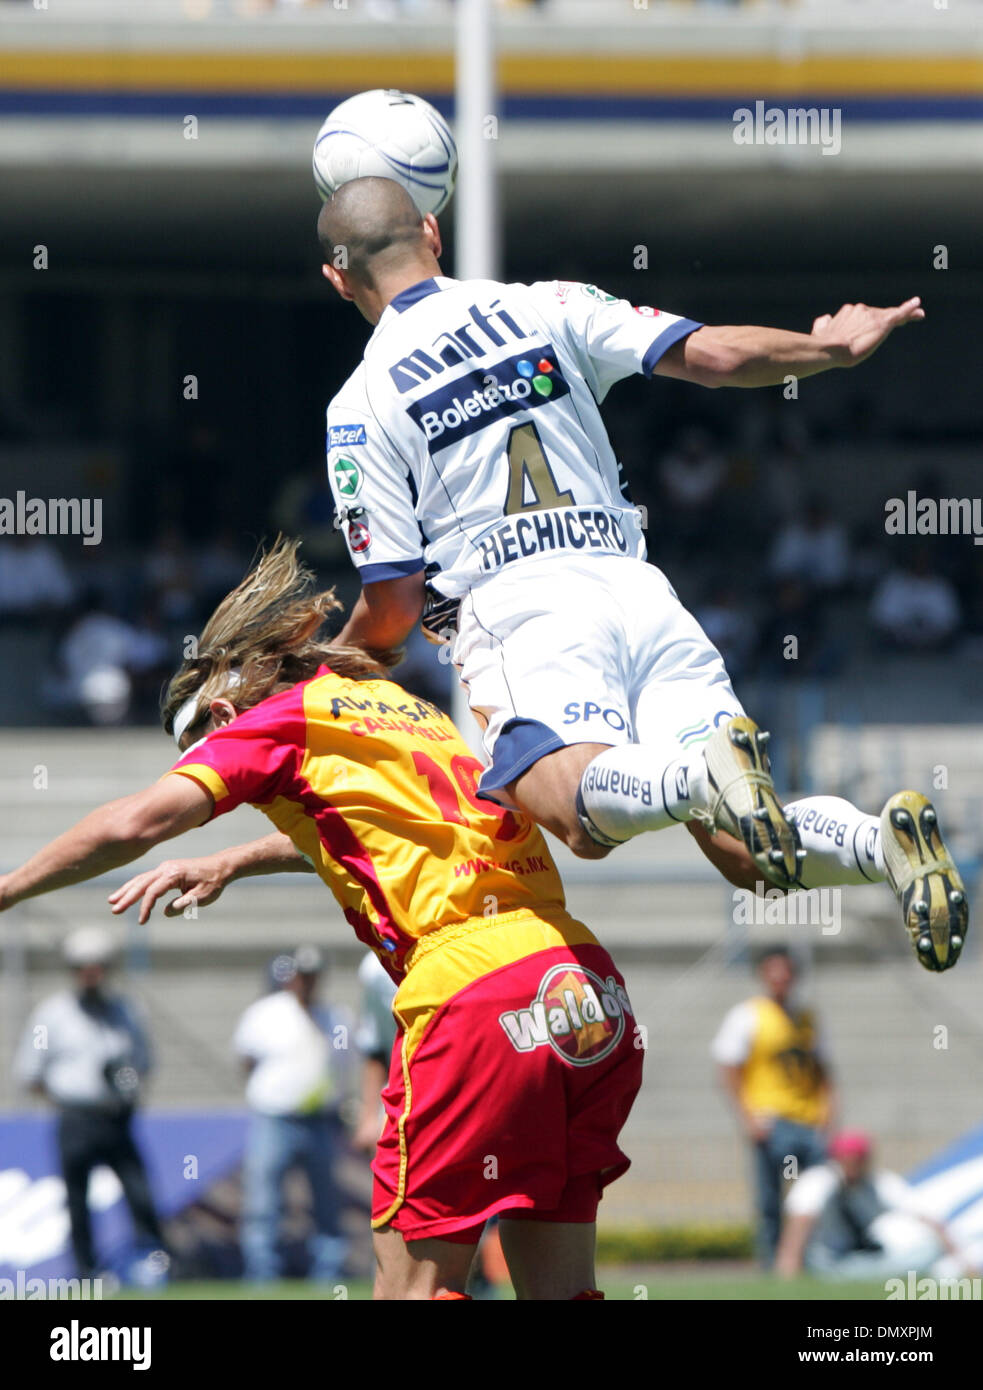 Mar 19, 2006; Mexico City, Mexico; UNAM Pumas defender DARIO VERON (R)  fights for the ball with UAG Tecos forward CARLOS DAVID CASARTELLI during  their soccer match at the University Stadium in